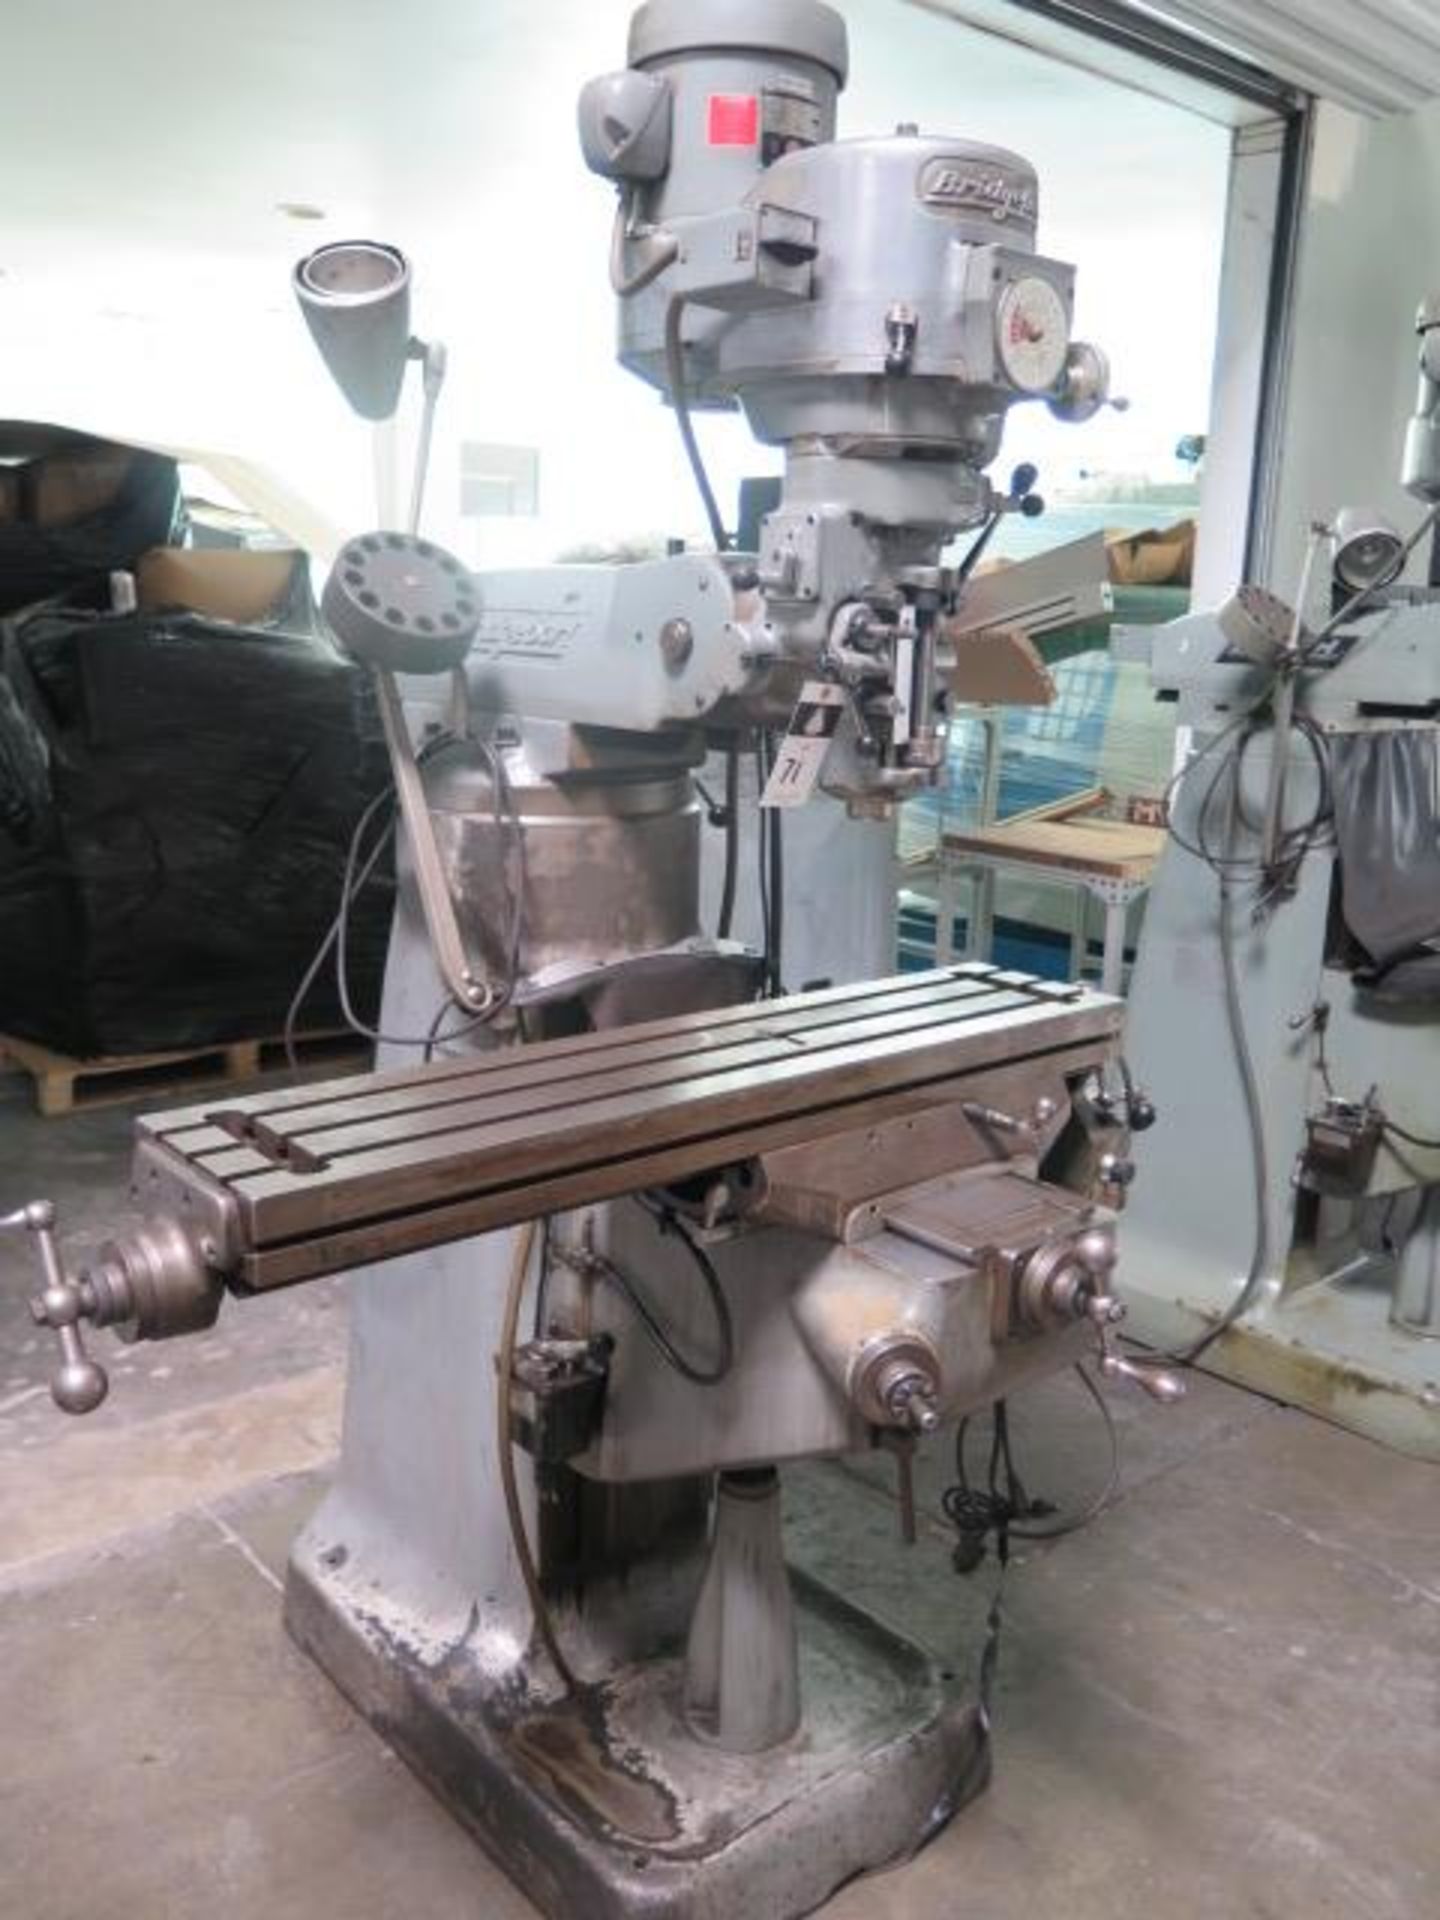 Bridgeport Vertical Mill s/n 166976 w/ DRO, 1.5Hp Motor, 60-4200 Dial RPM, Chrome Ways, SOLD AS IS - Image 2 of 9